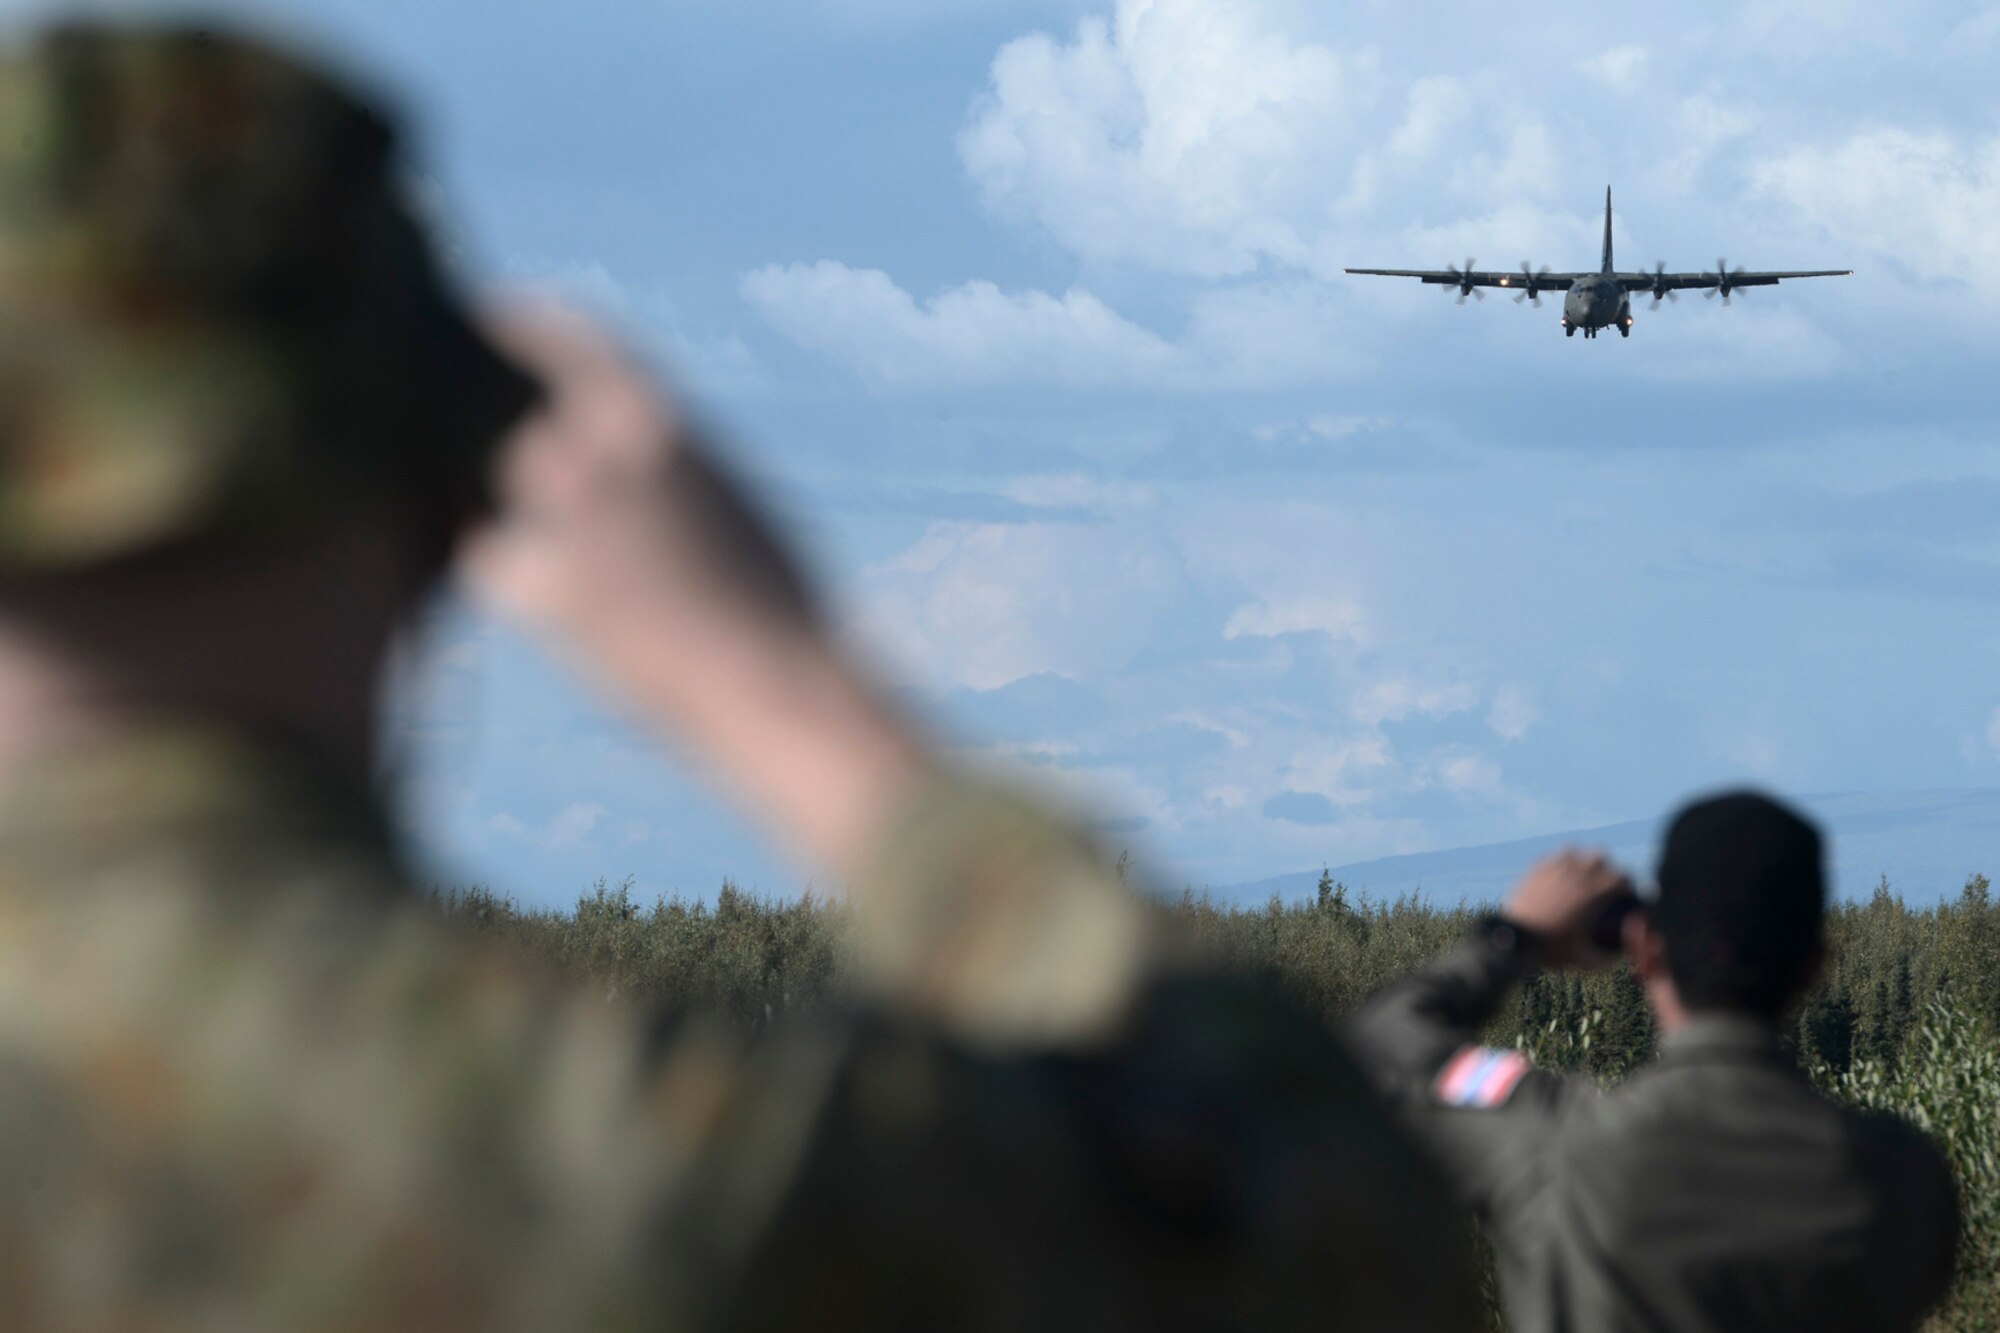 Aircrew view a C-130 Hercules low-level approach during RED FLAG-Alaska at Joint Base Elmendorf-Richardson, Alaska, Aug. 14, 2015. The training allowed C-130 aircrew to practice austere landings and take offs, combat offloads and supply drops, but also allowed friendly competition between participating Air Forces: U.S. Air Force, Japan Air Self-Defense Force, Royal Air Force, Royal Australian Air Force, Royal New Zealand Air Force and Royal Thai Air Force. Seasoned C-130 aircrew from each country judged the training exercises from the ground, allotting points based off predetermined timing and accuracy requirements. (U.S. Air Force photo by Staff Sgt. Cody H. Ramirez/Released)